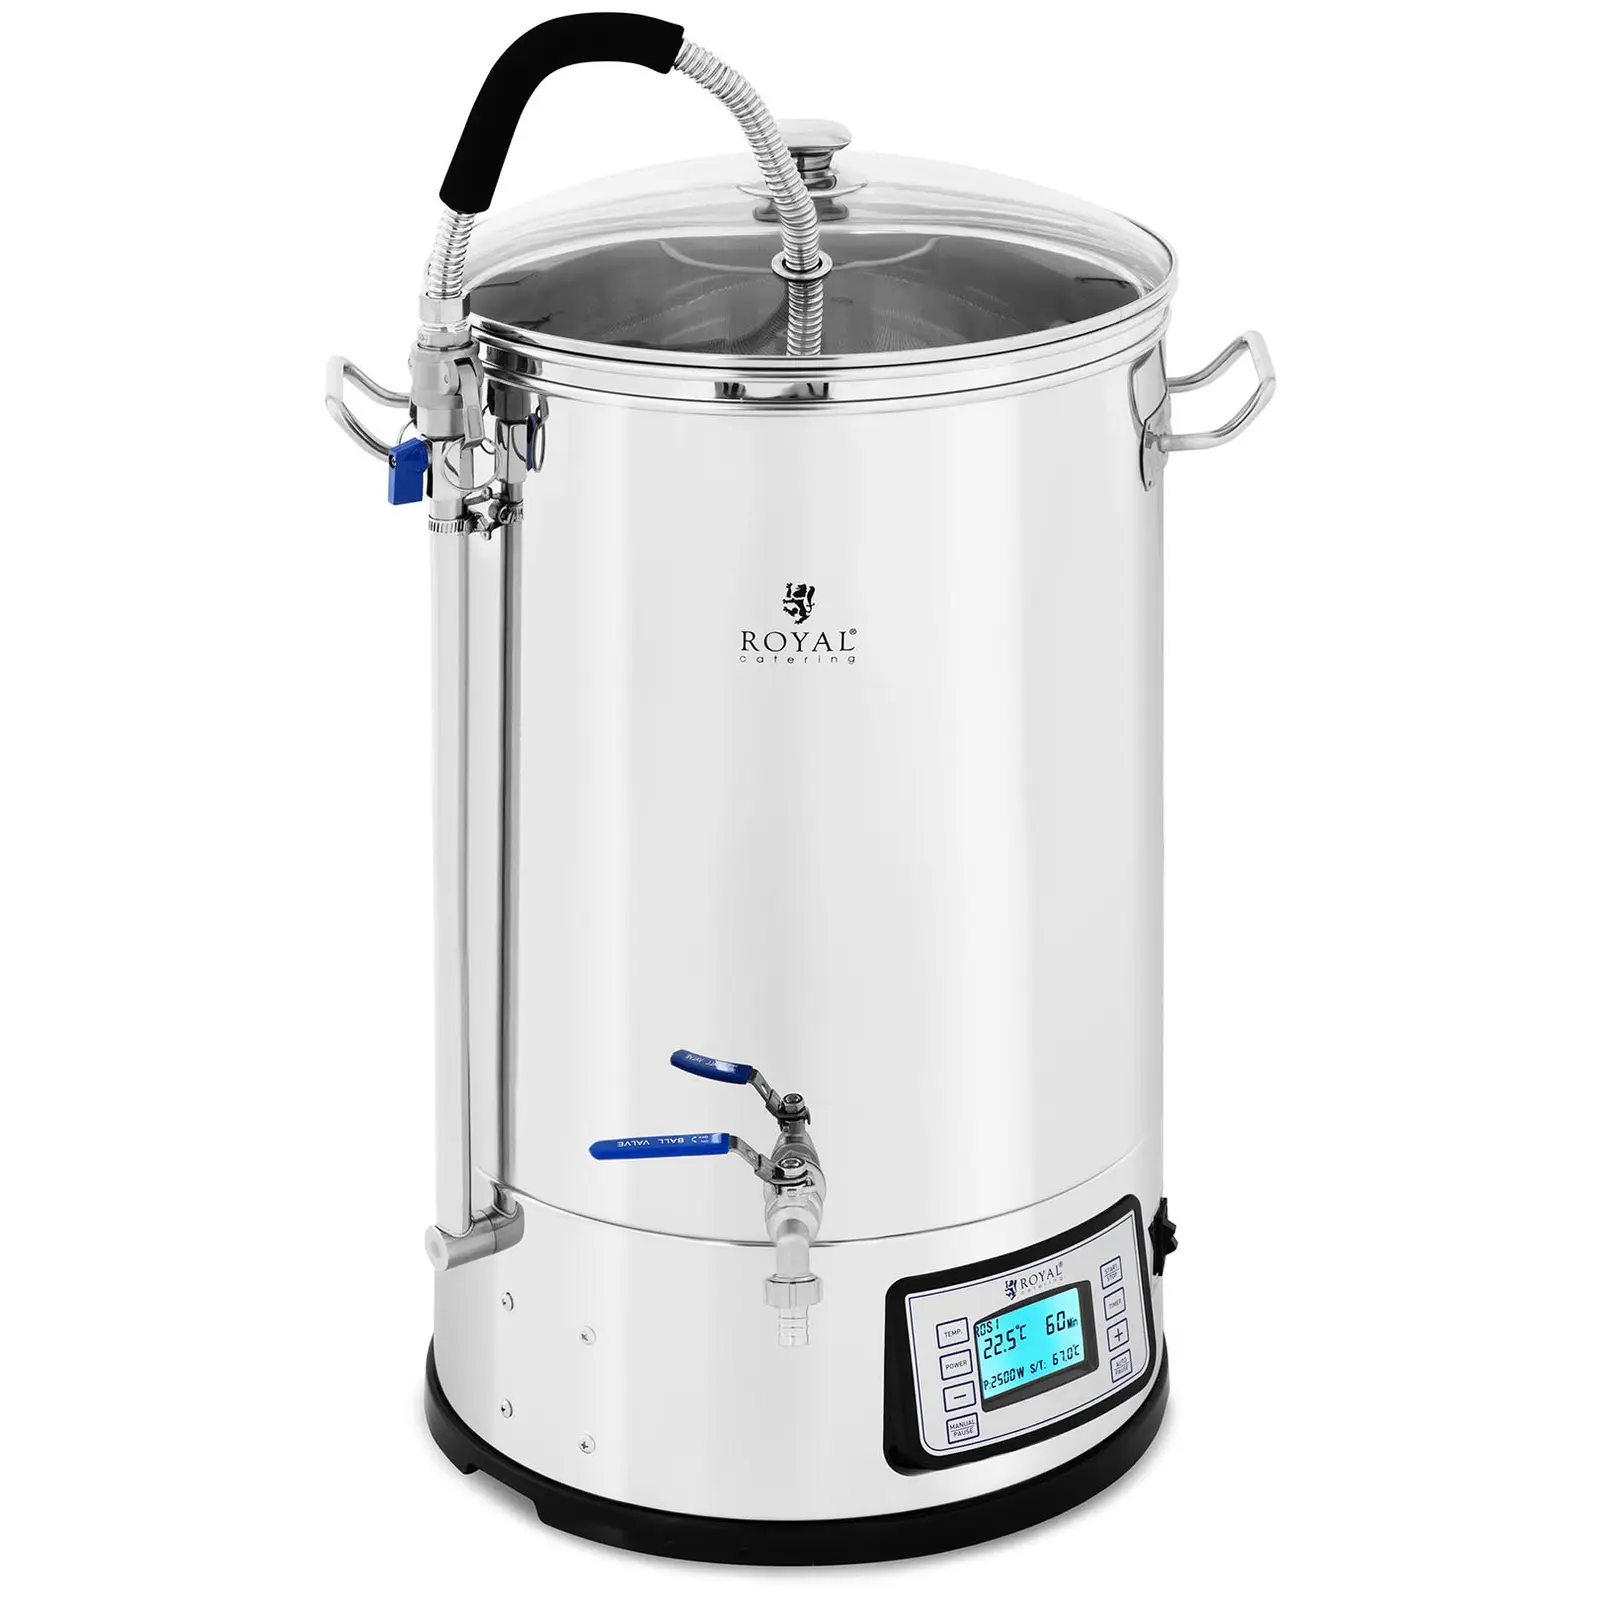 Brew Kettle -  L - 2,500 W -  ° C - Stainless steel - Display  - Timer